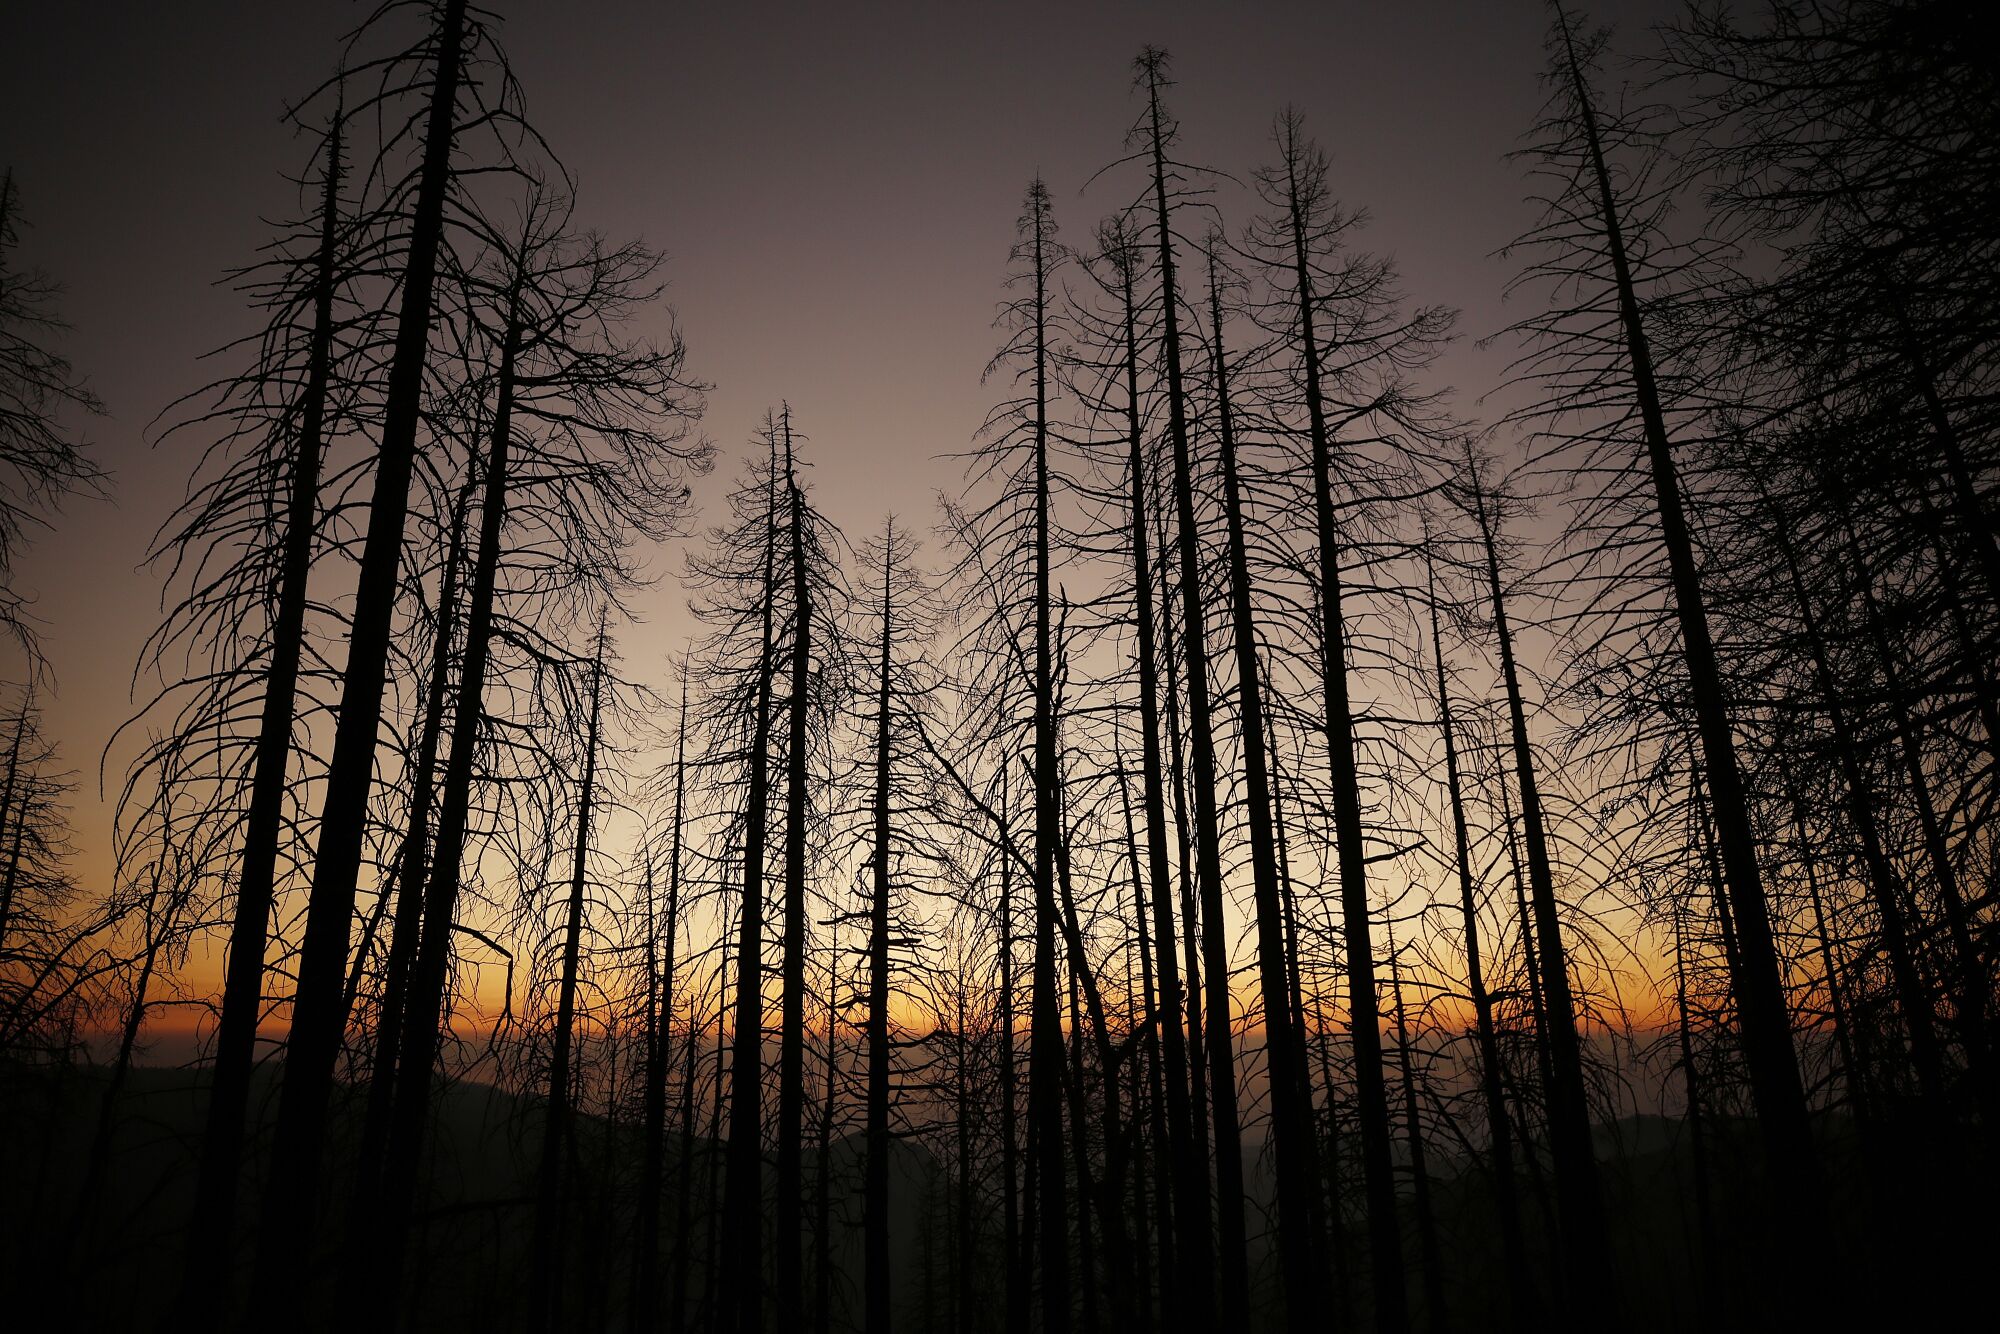 Barren trees in front of a smoky orange and purple sunset